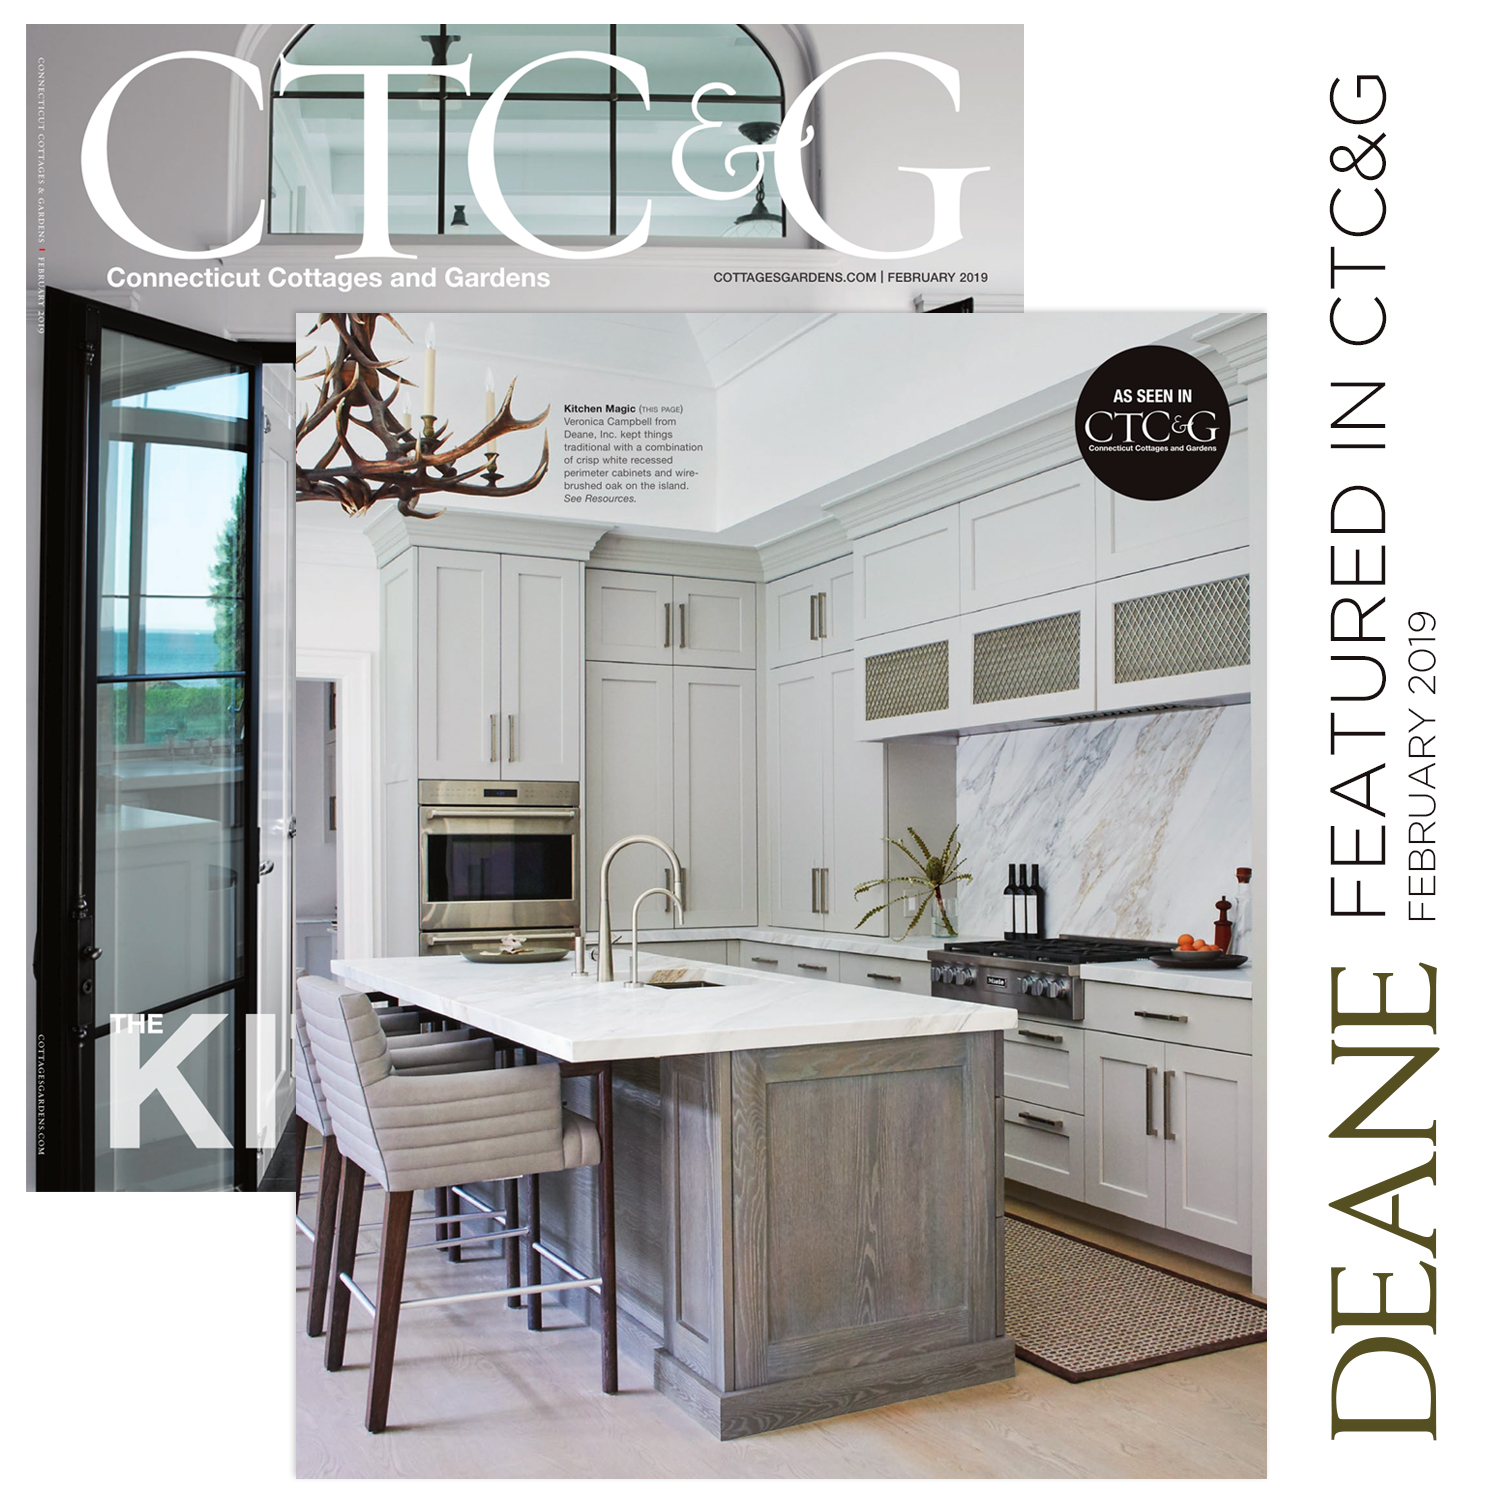 DEANE Inc, Kitchens by Deane, Featured in CTC&G